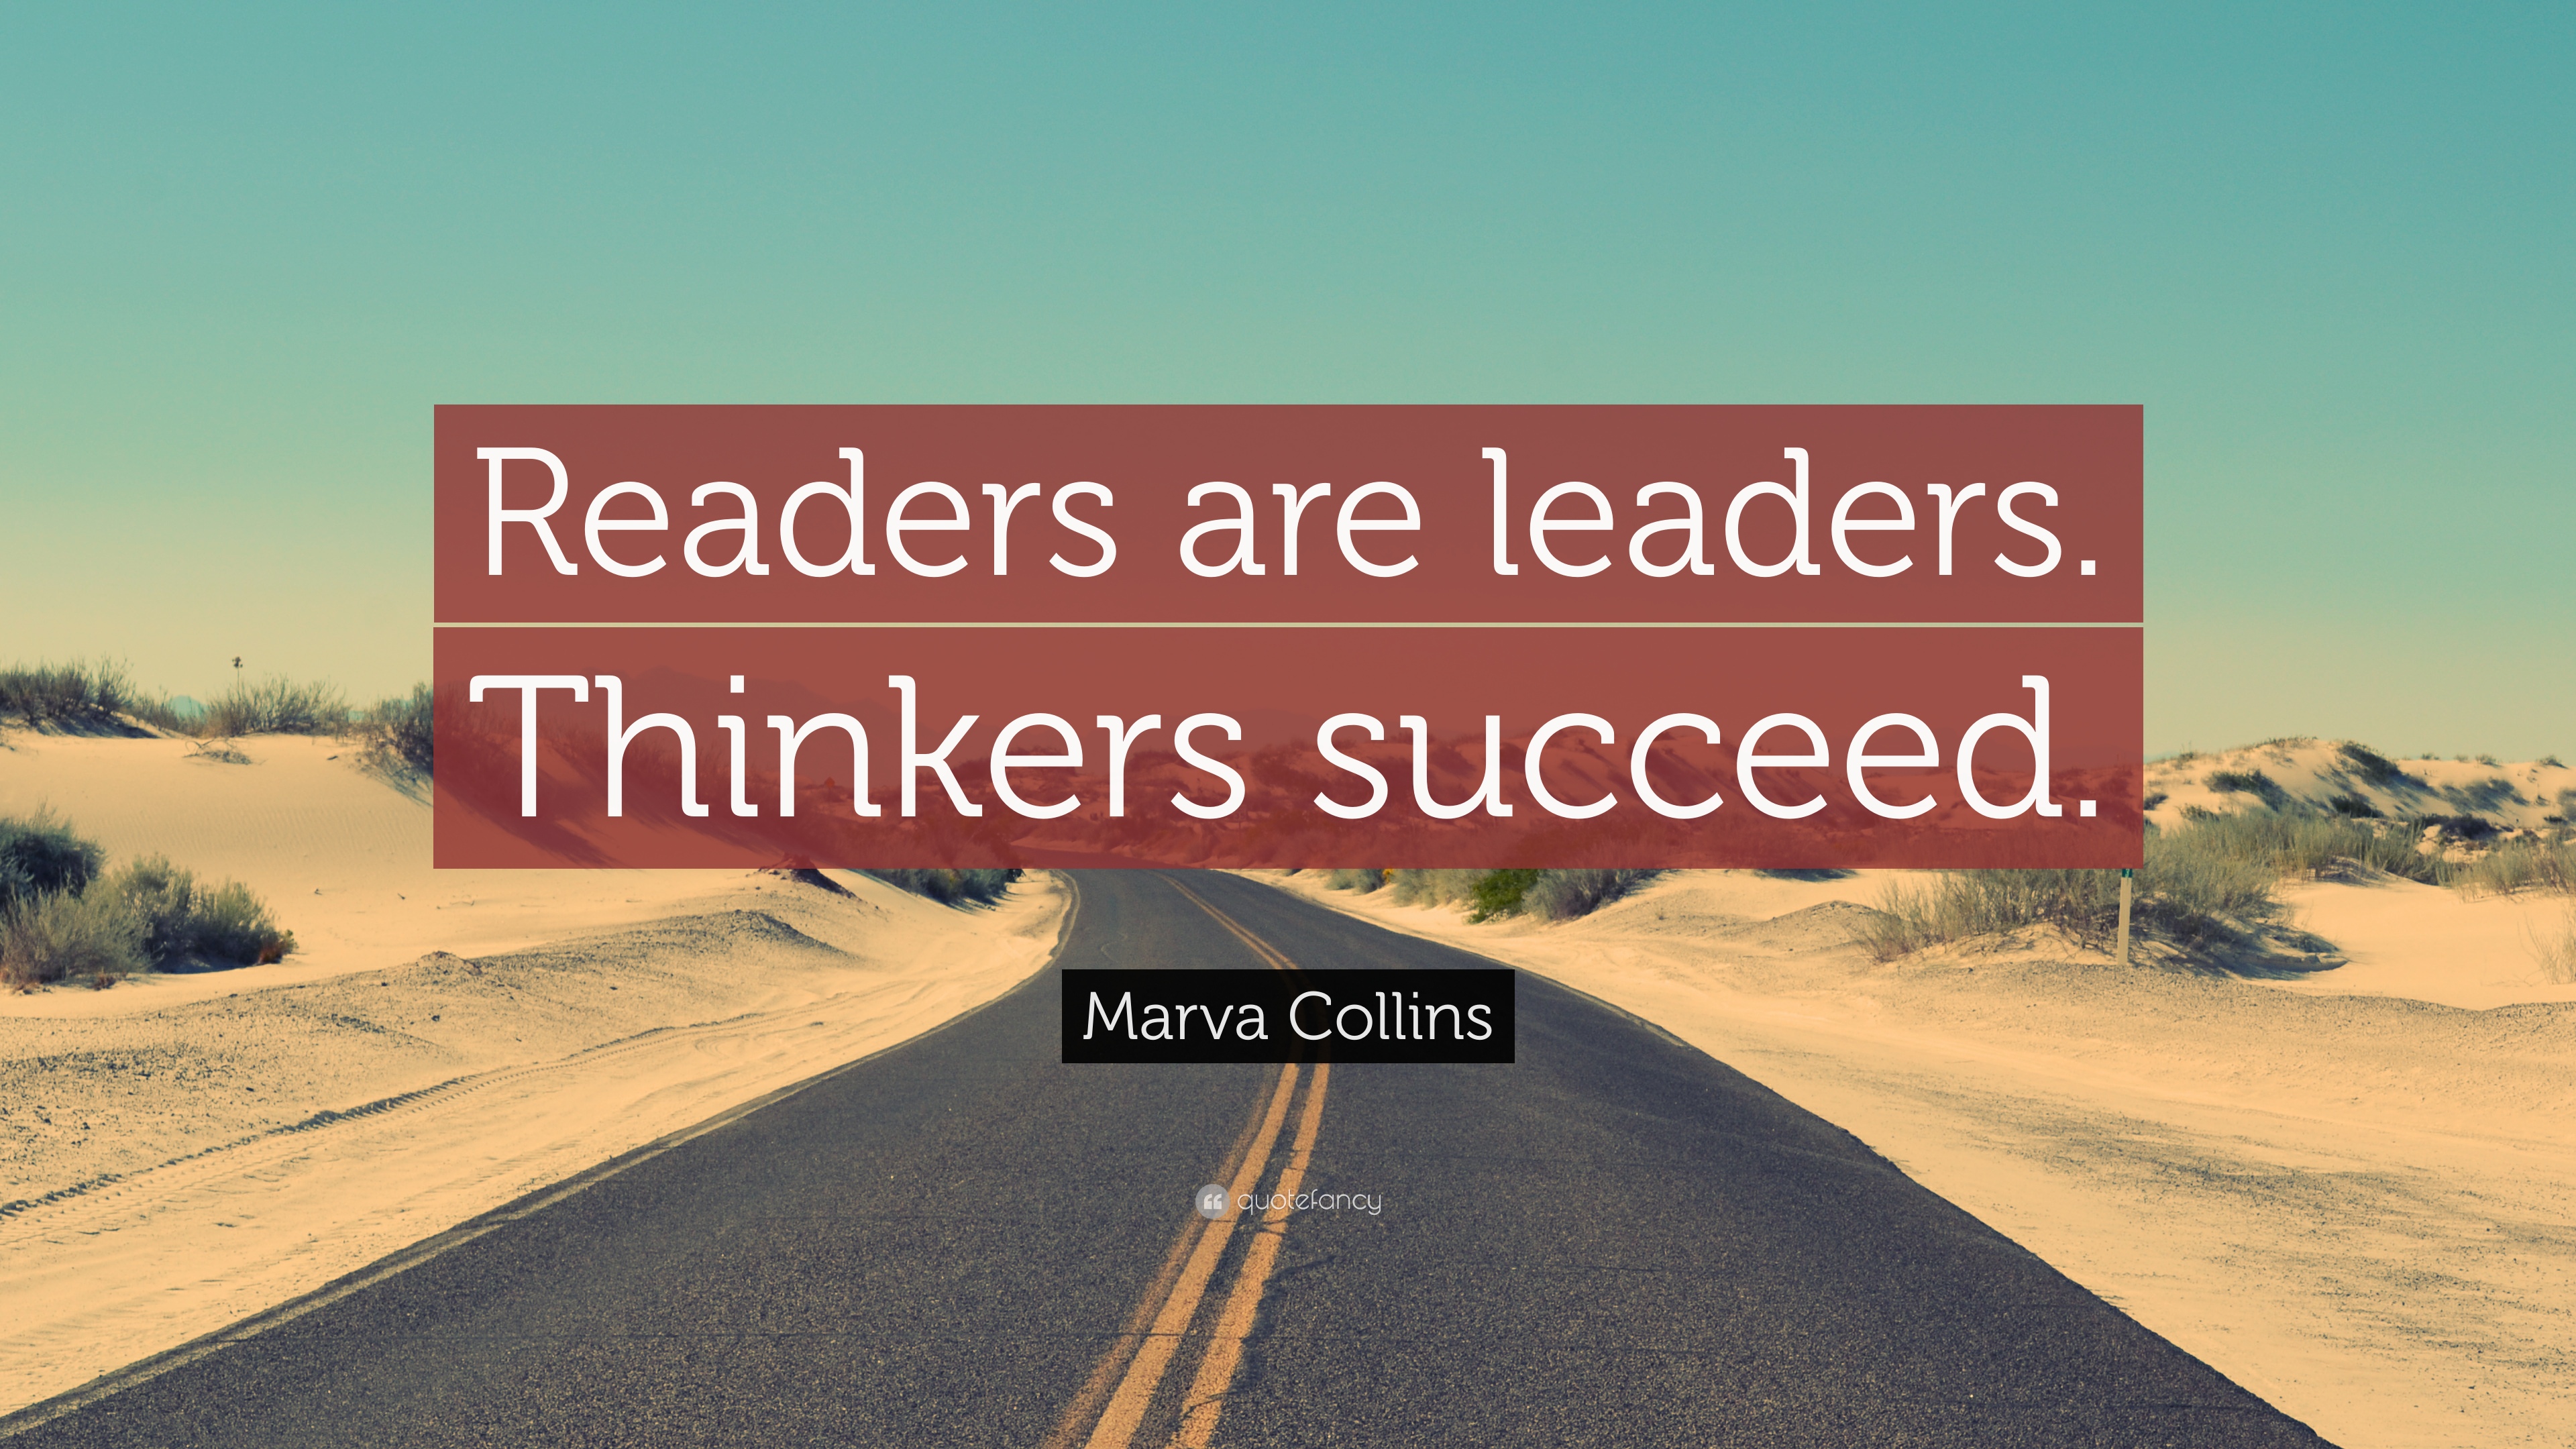 Marva Collins Quote: “Readers are leaders. Thinkers succeed